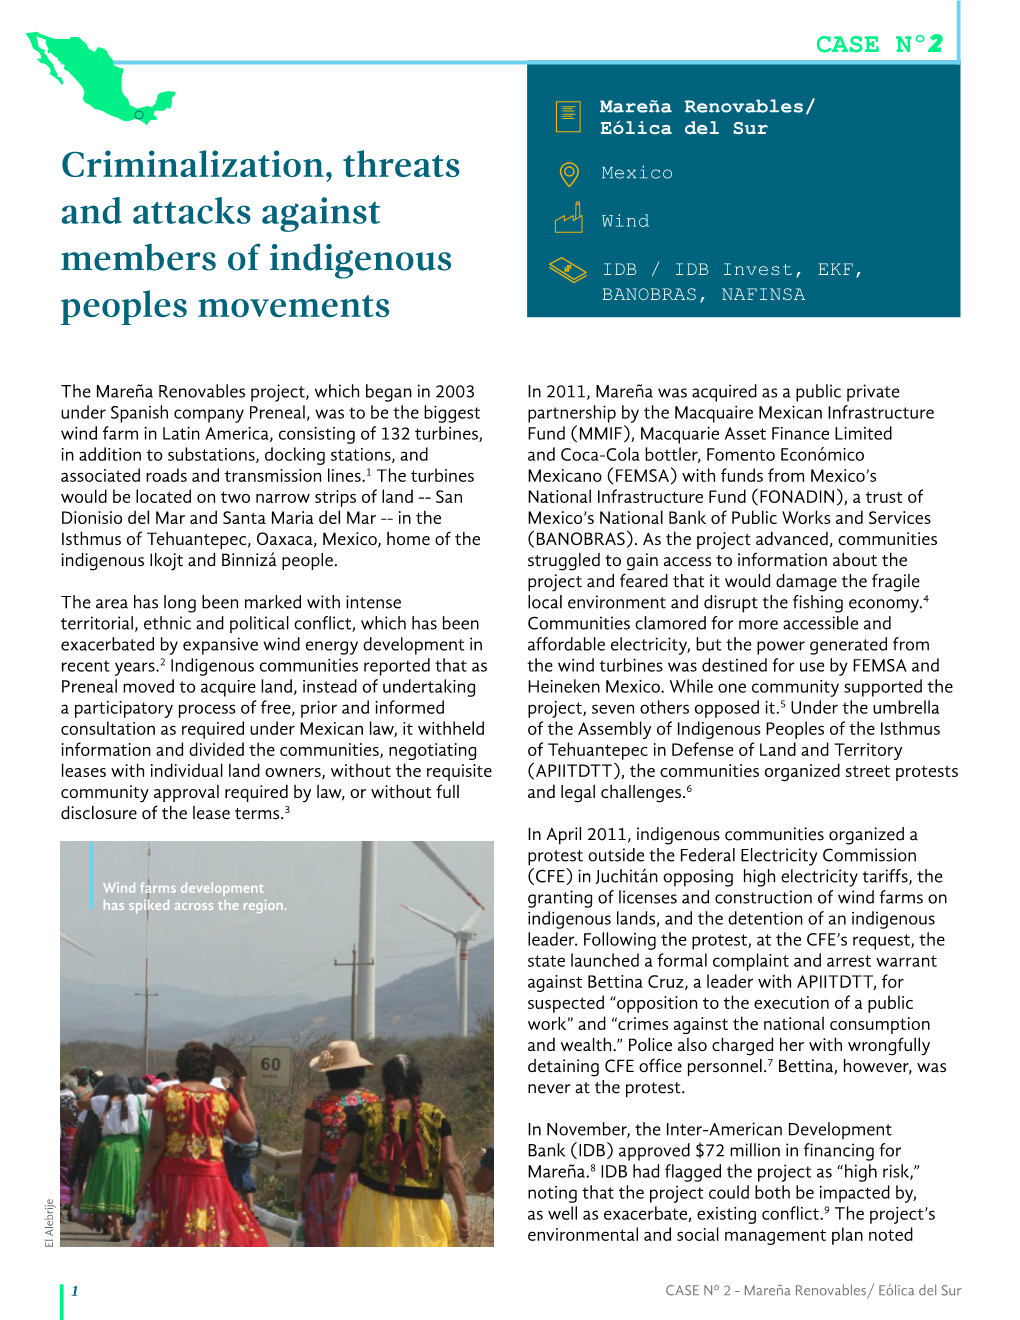 Criminalization, Threats and Attacks Against Members of Indigenous